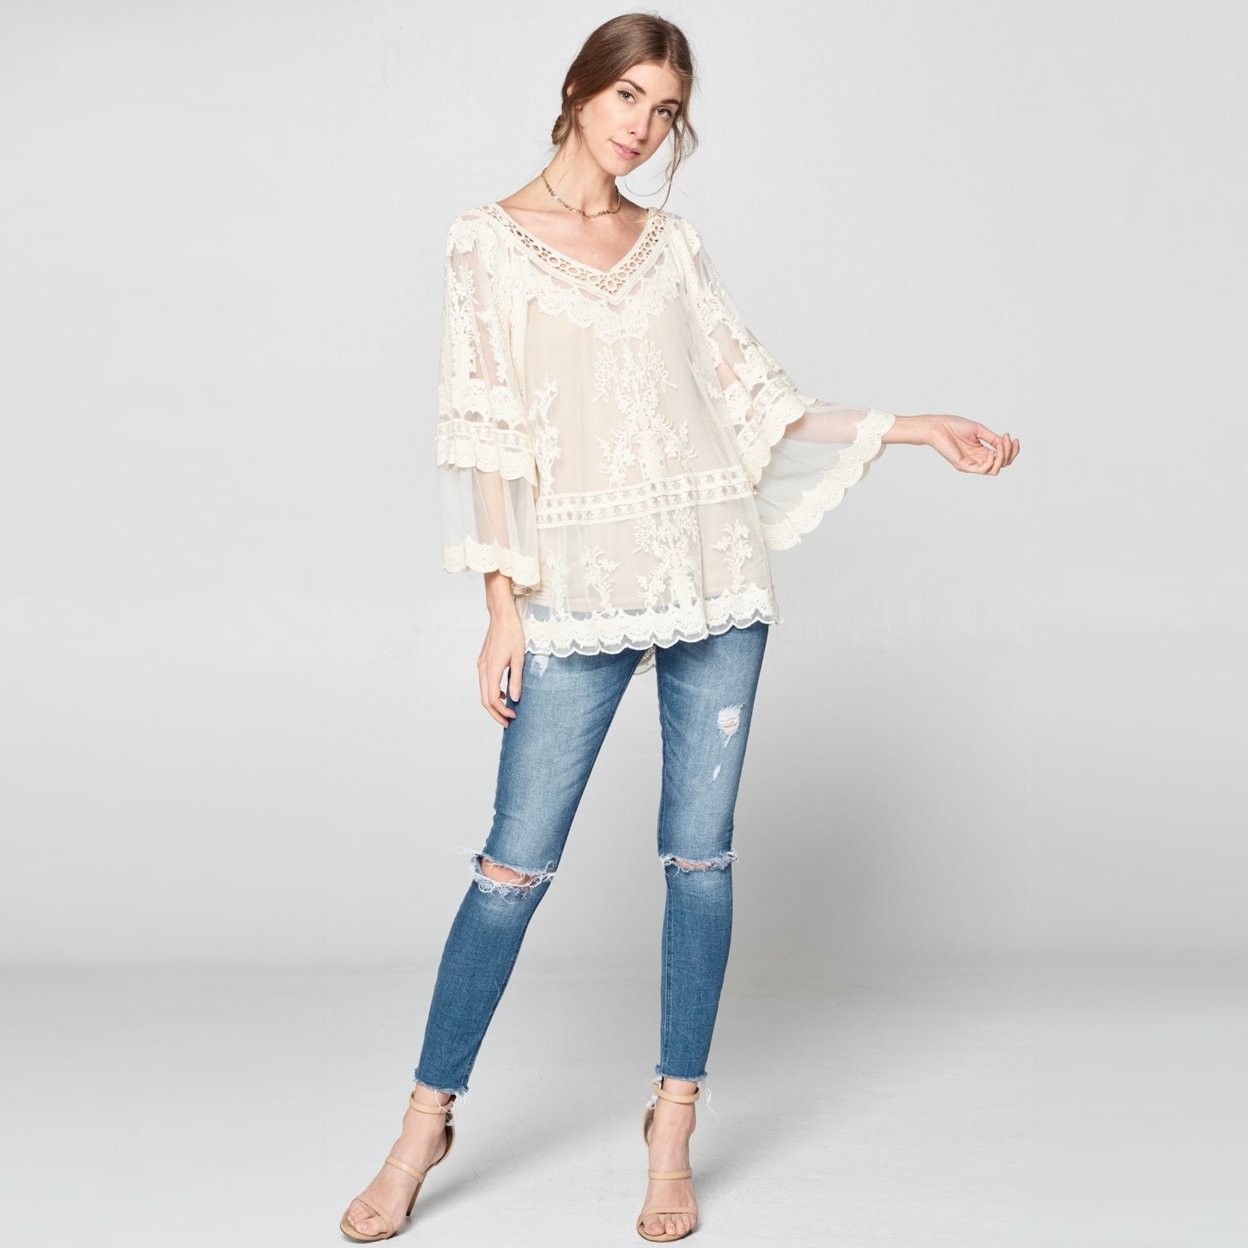 Embroidered Fleur Lace Top - Ivory, Small (2-6)